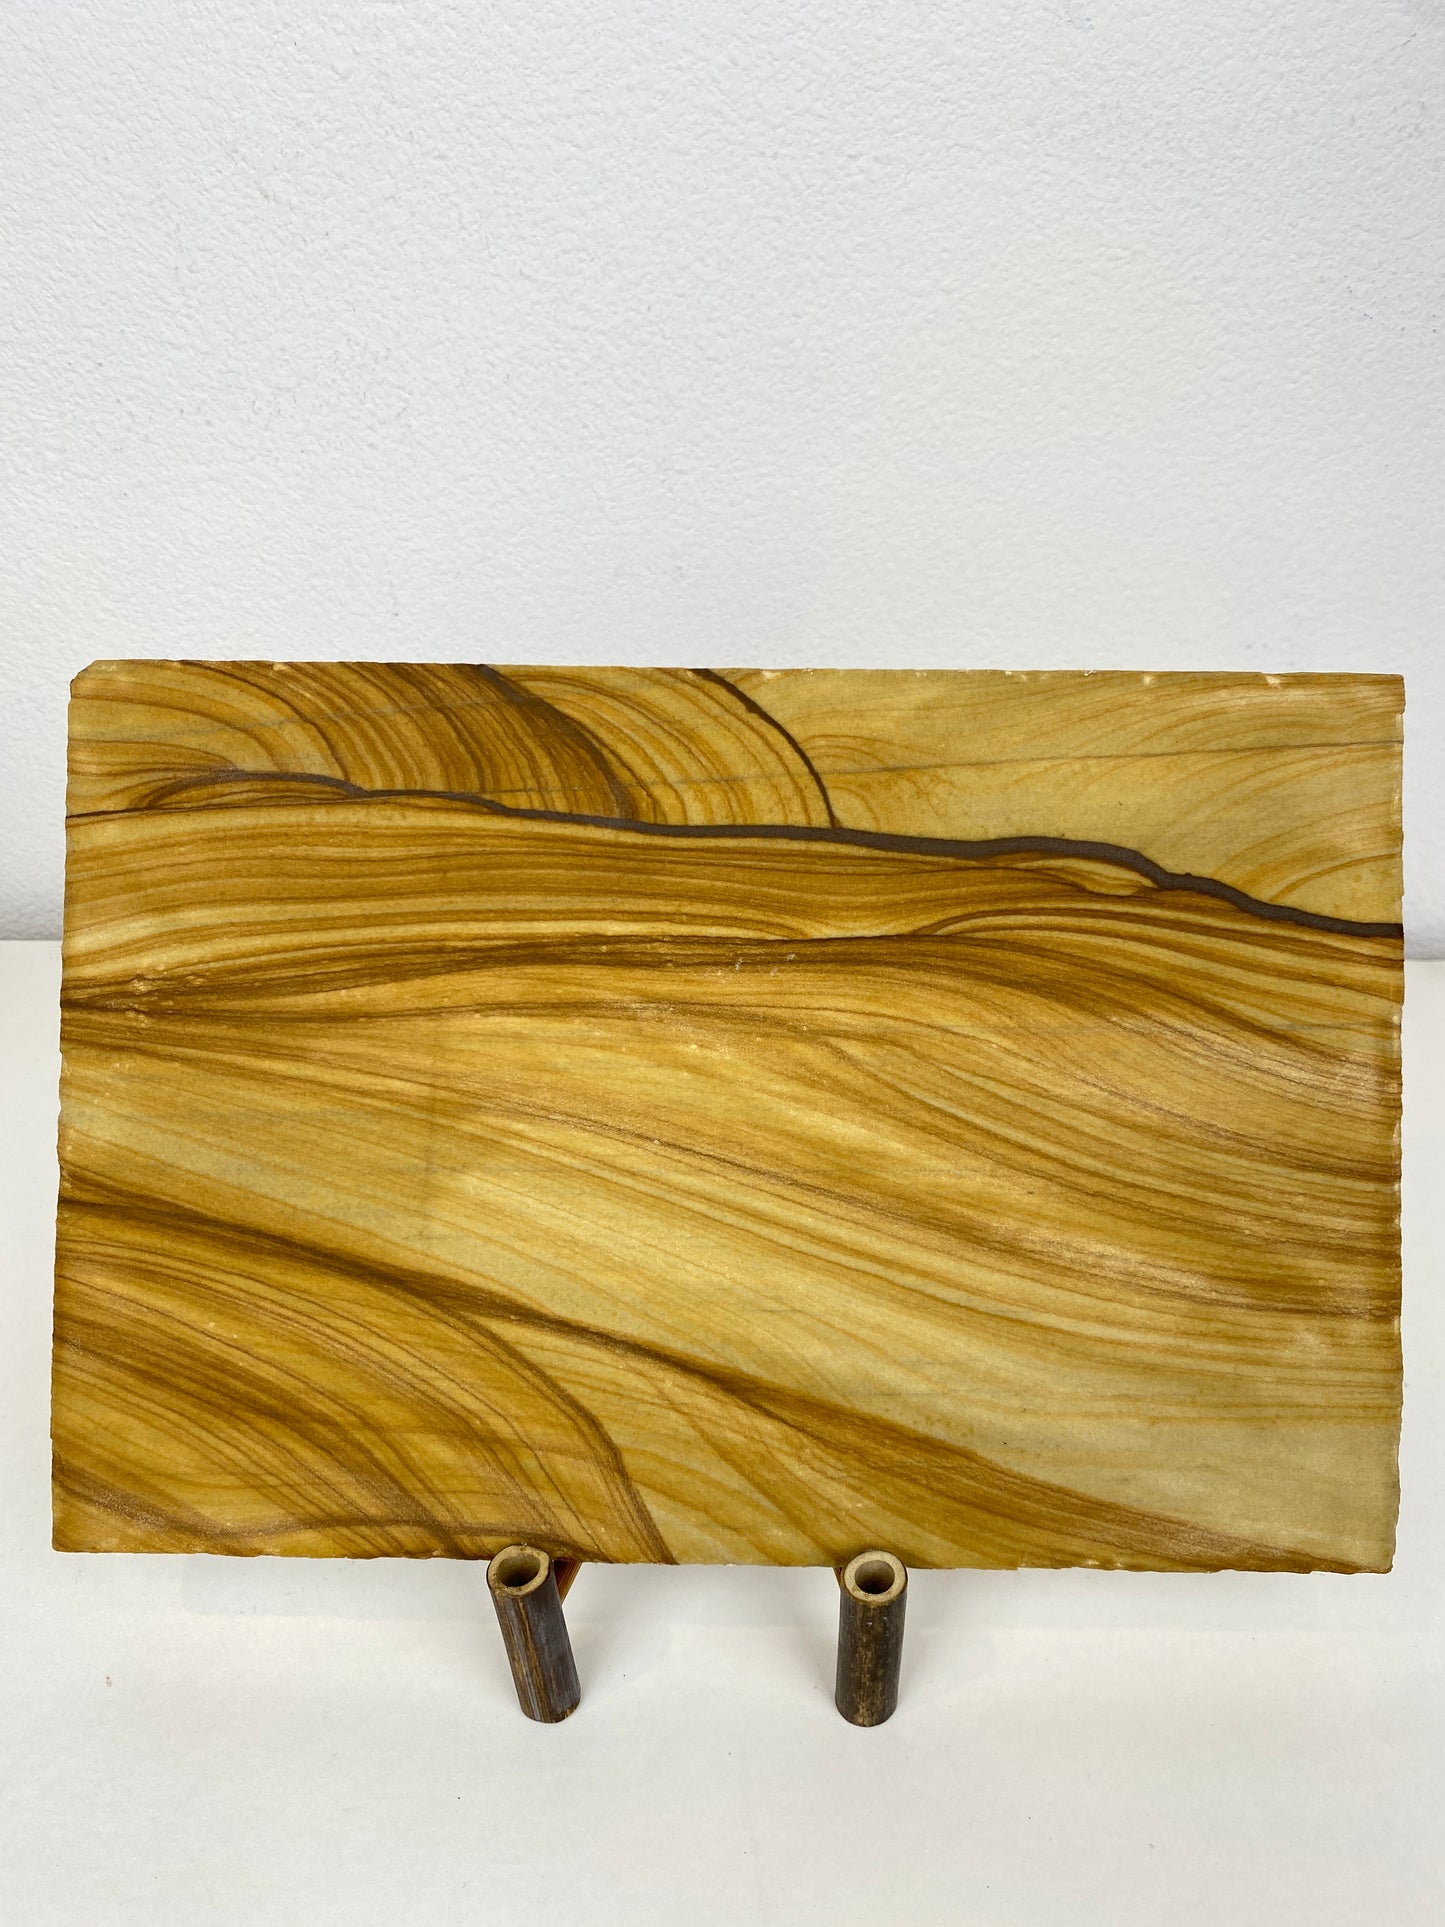 Contemporary Natural Stone Slab, Extraordinary Natural Sandstone, Desert Dunes, double-sided, Wood Pattern unique and clear